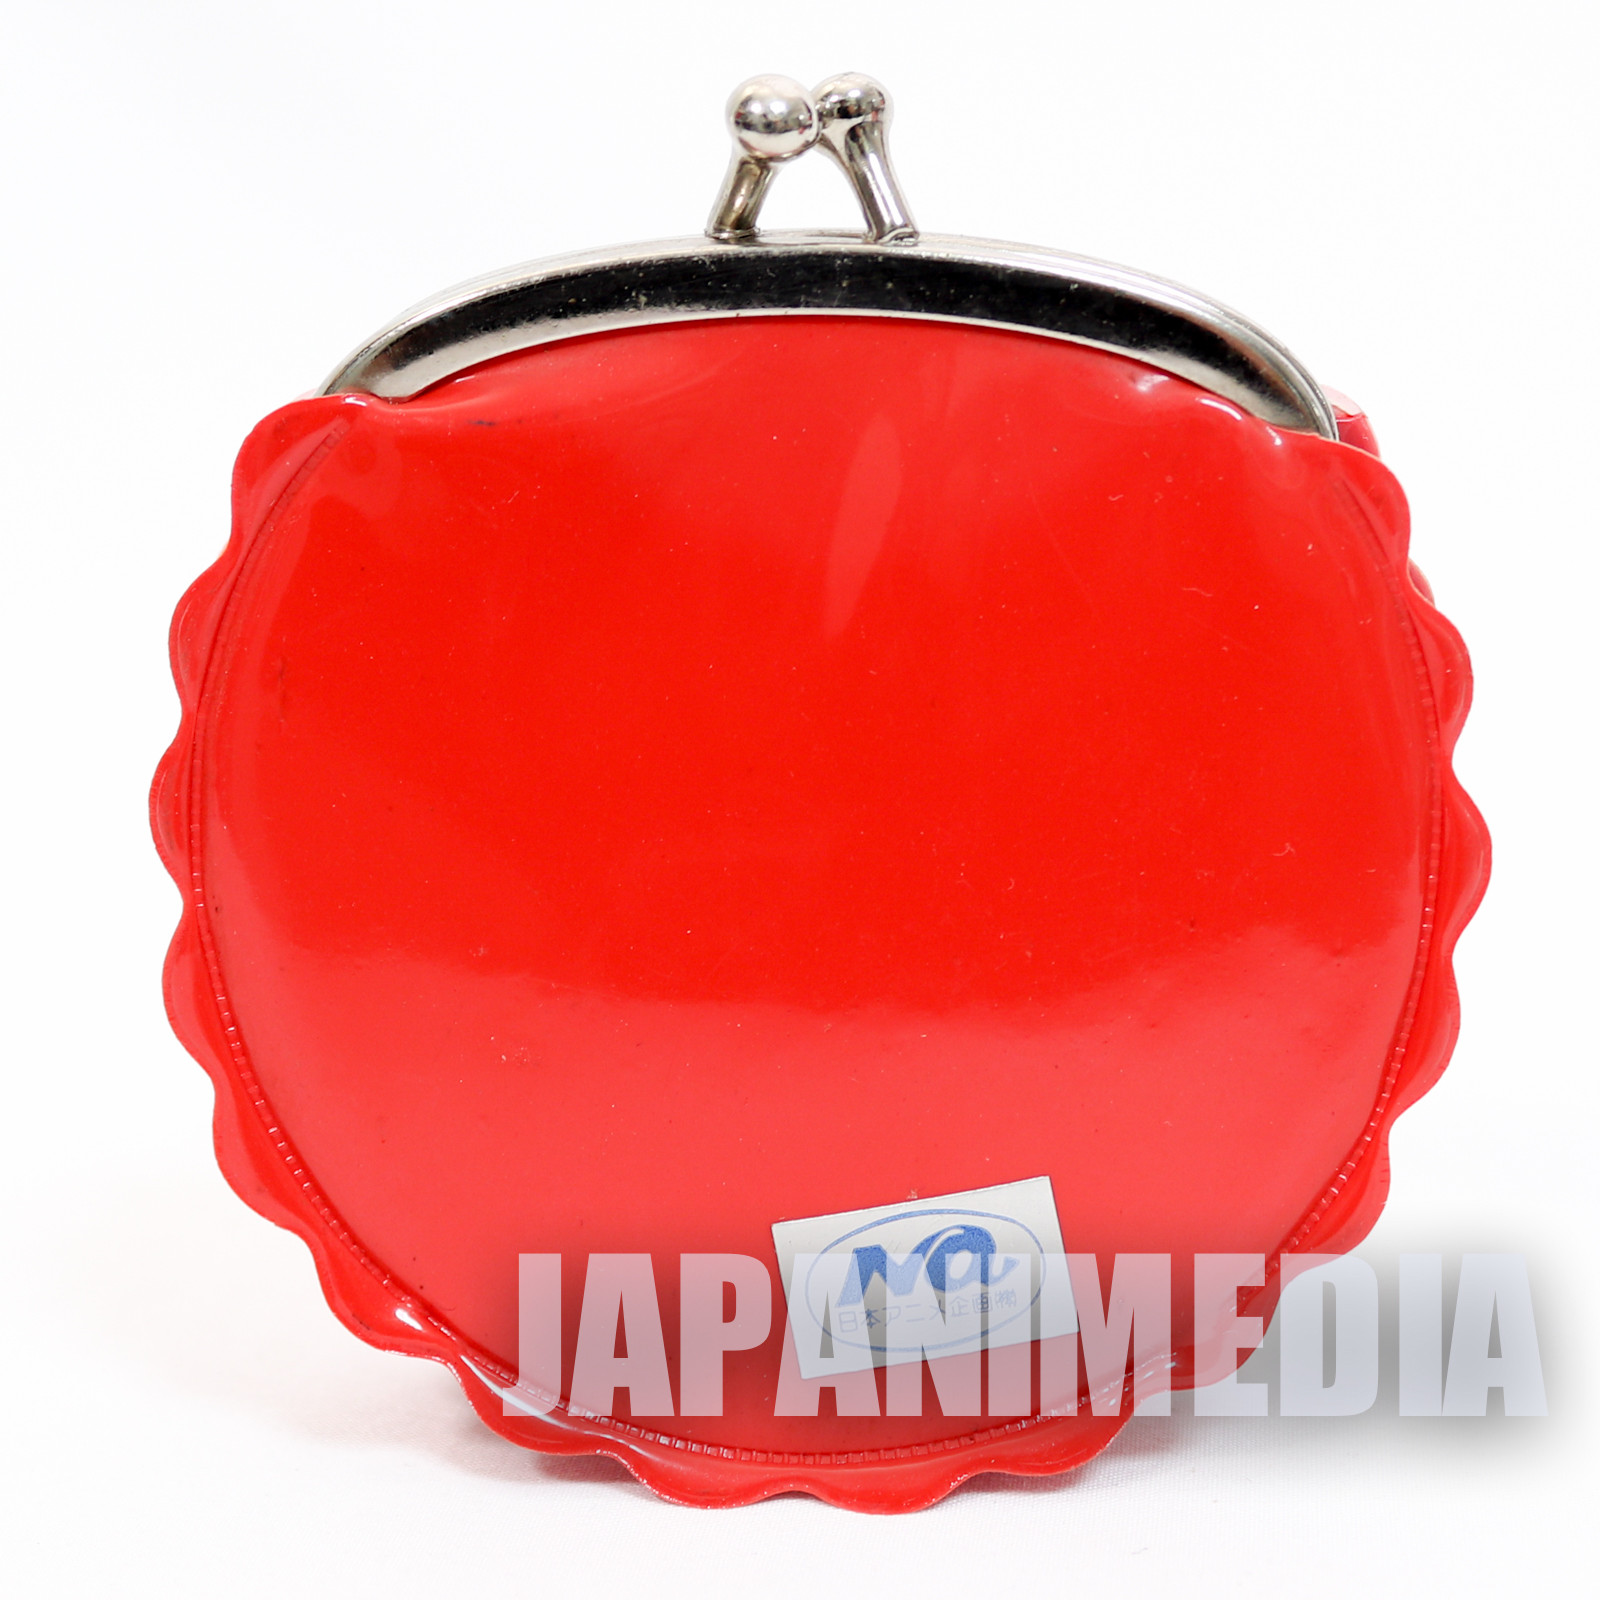 Retro! Anne of Green Gables Purse with a Clasp Coin Case Red #3 JAPAN ANIME